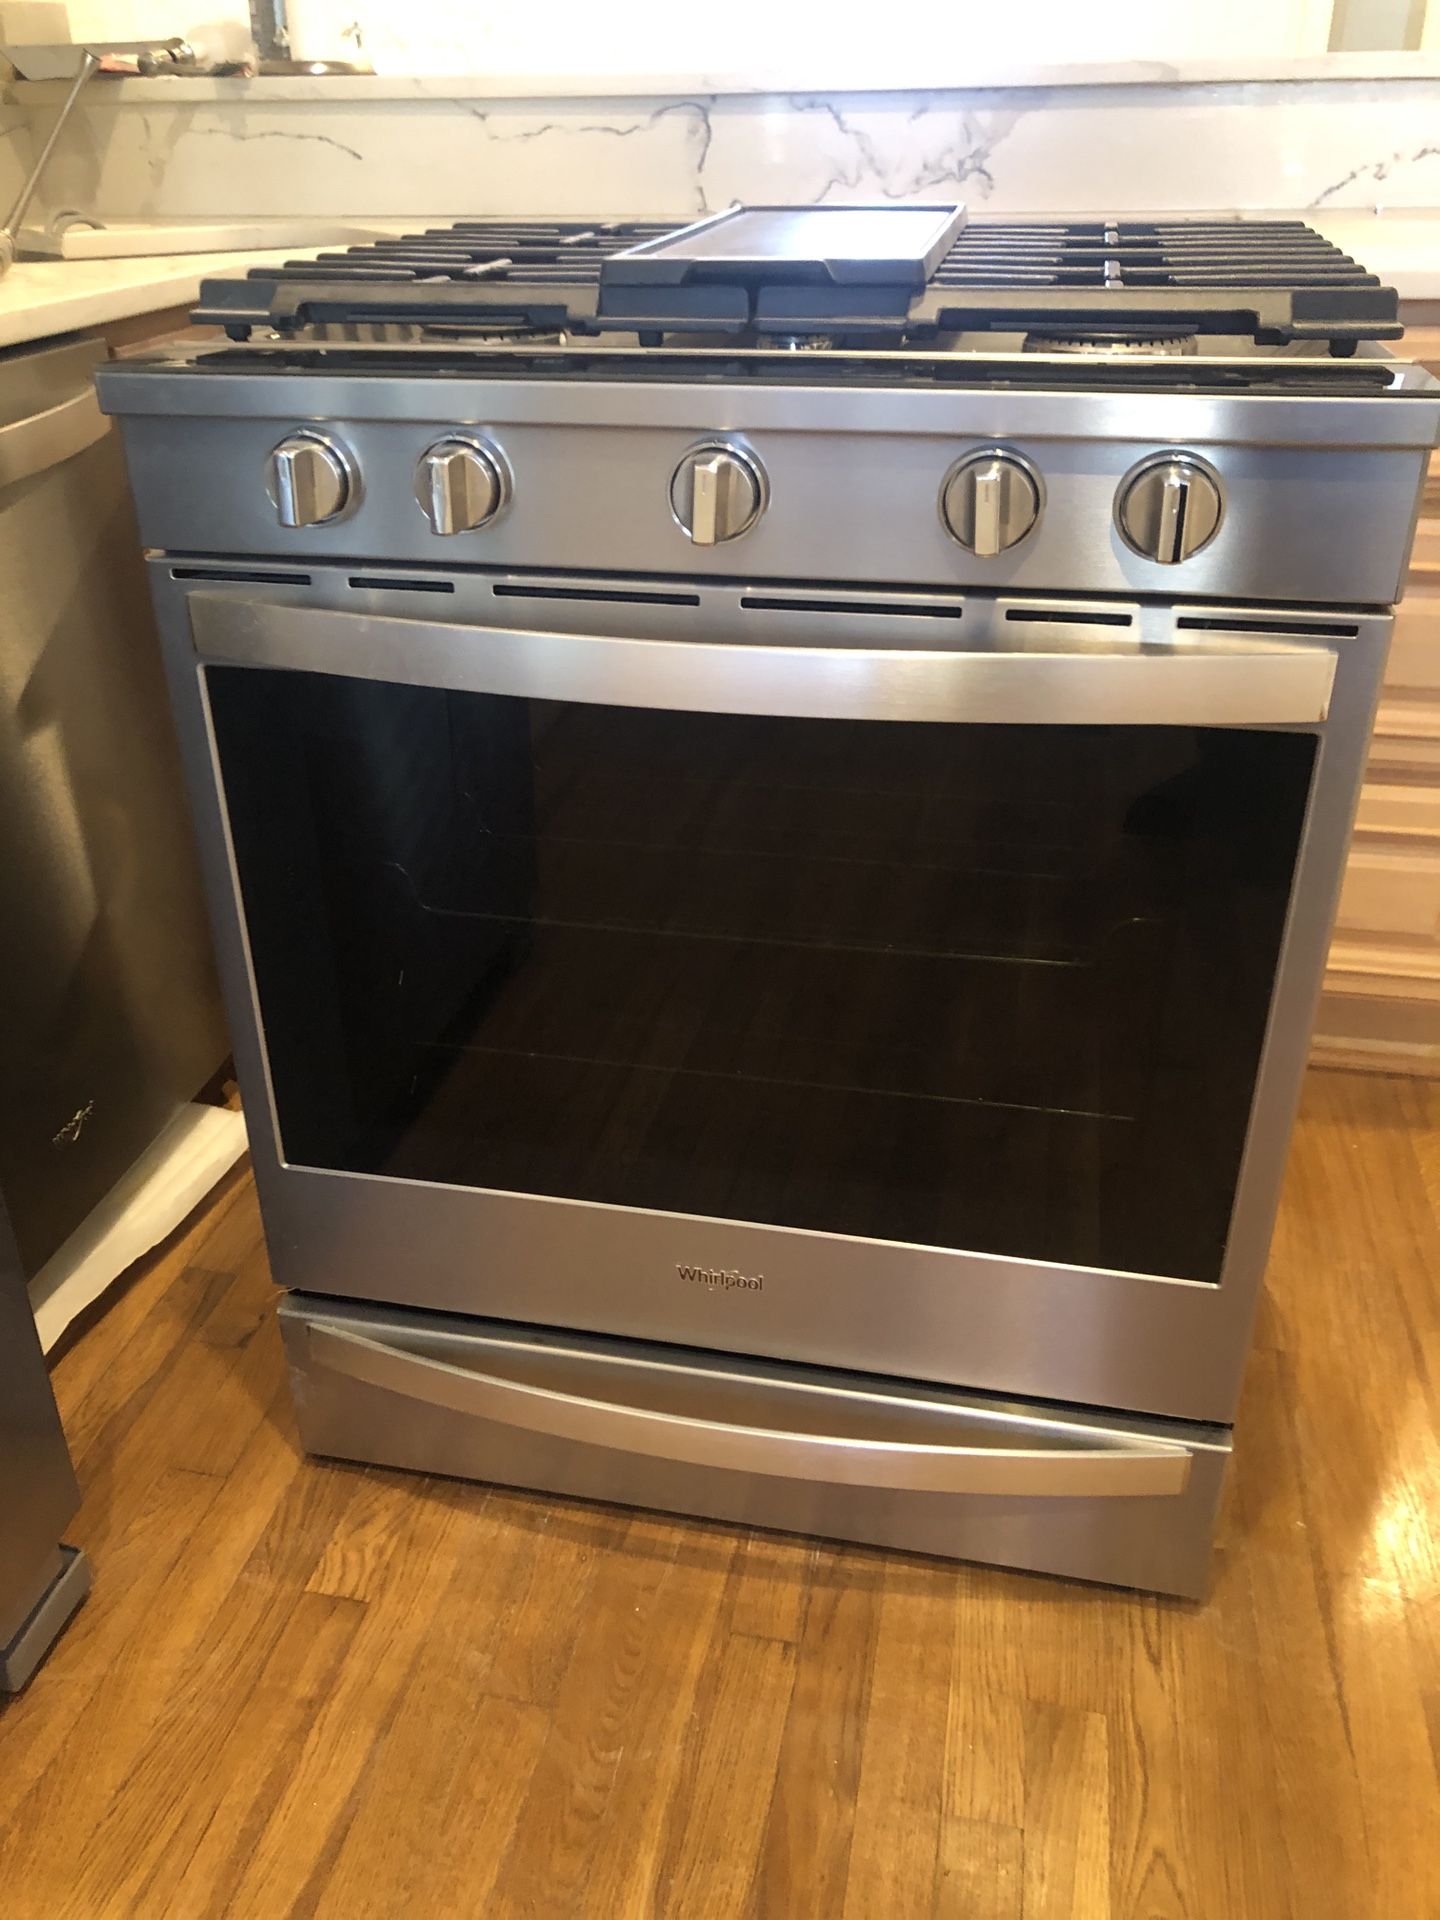 Never used 30” Whirlpool Gas Slide-In Stove 60% Off!